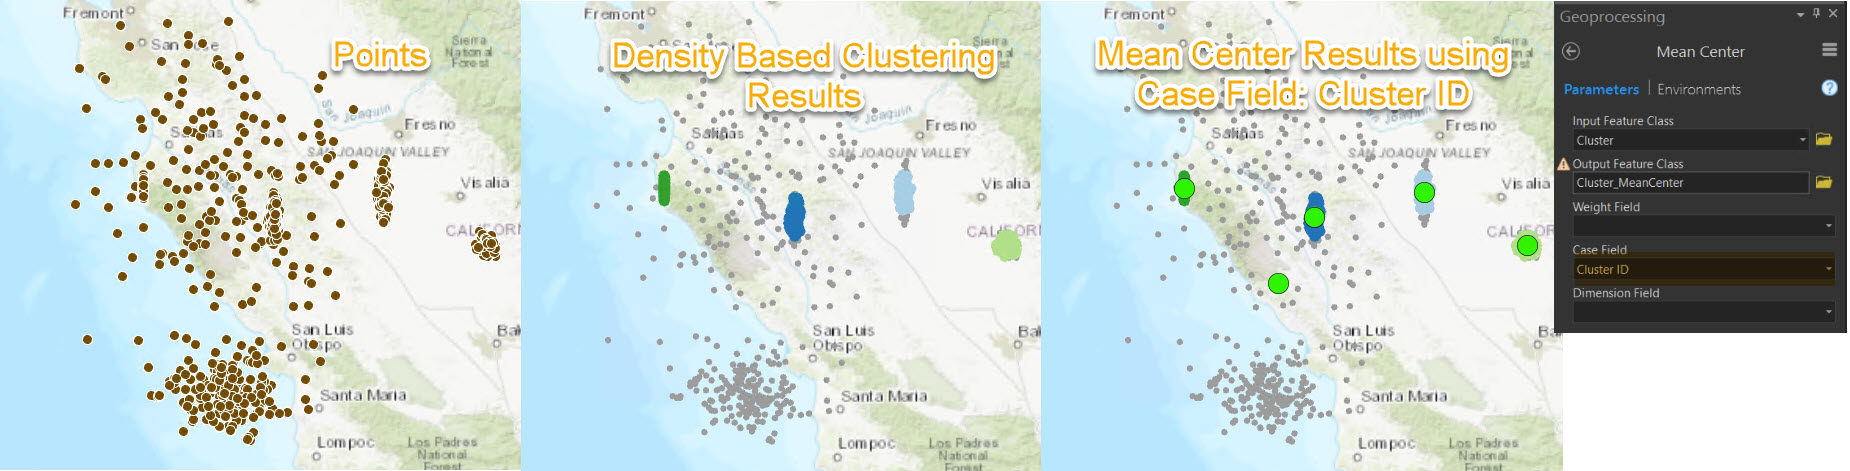 Work flow using density based clustering and mean center using cluster ID as a case field.